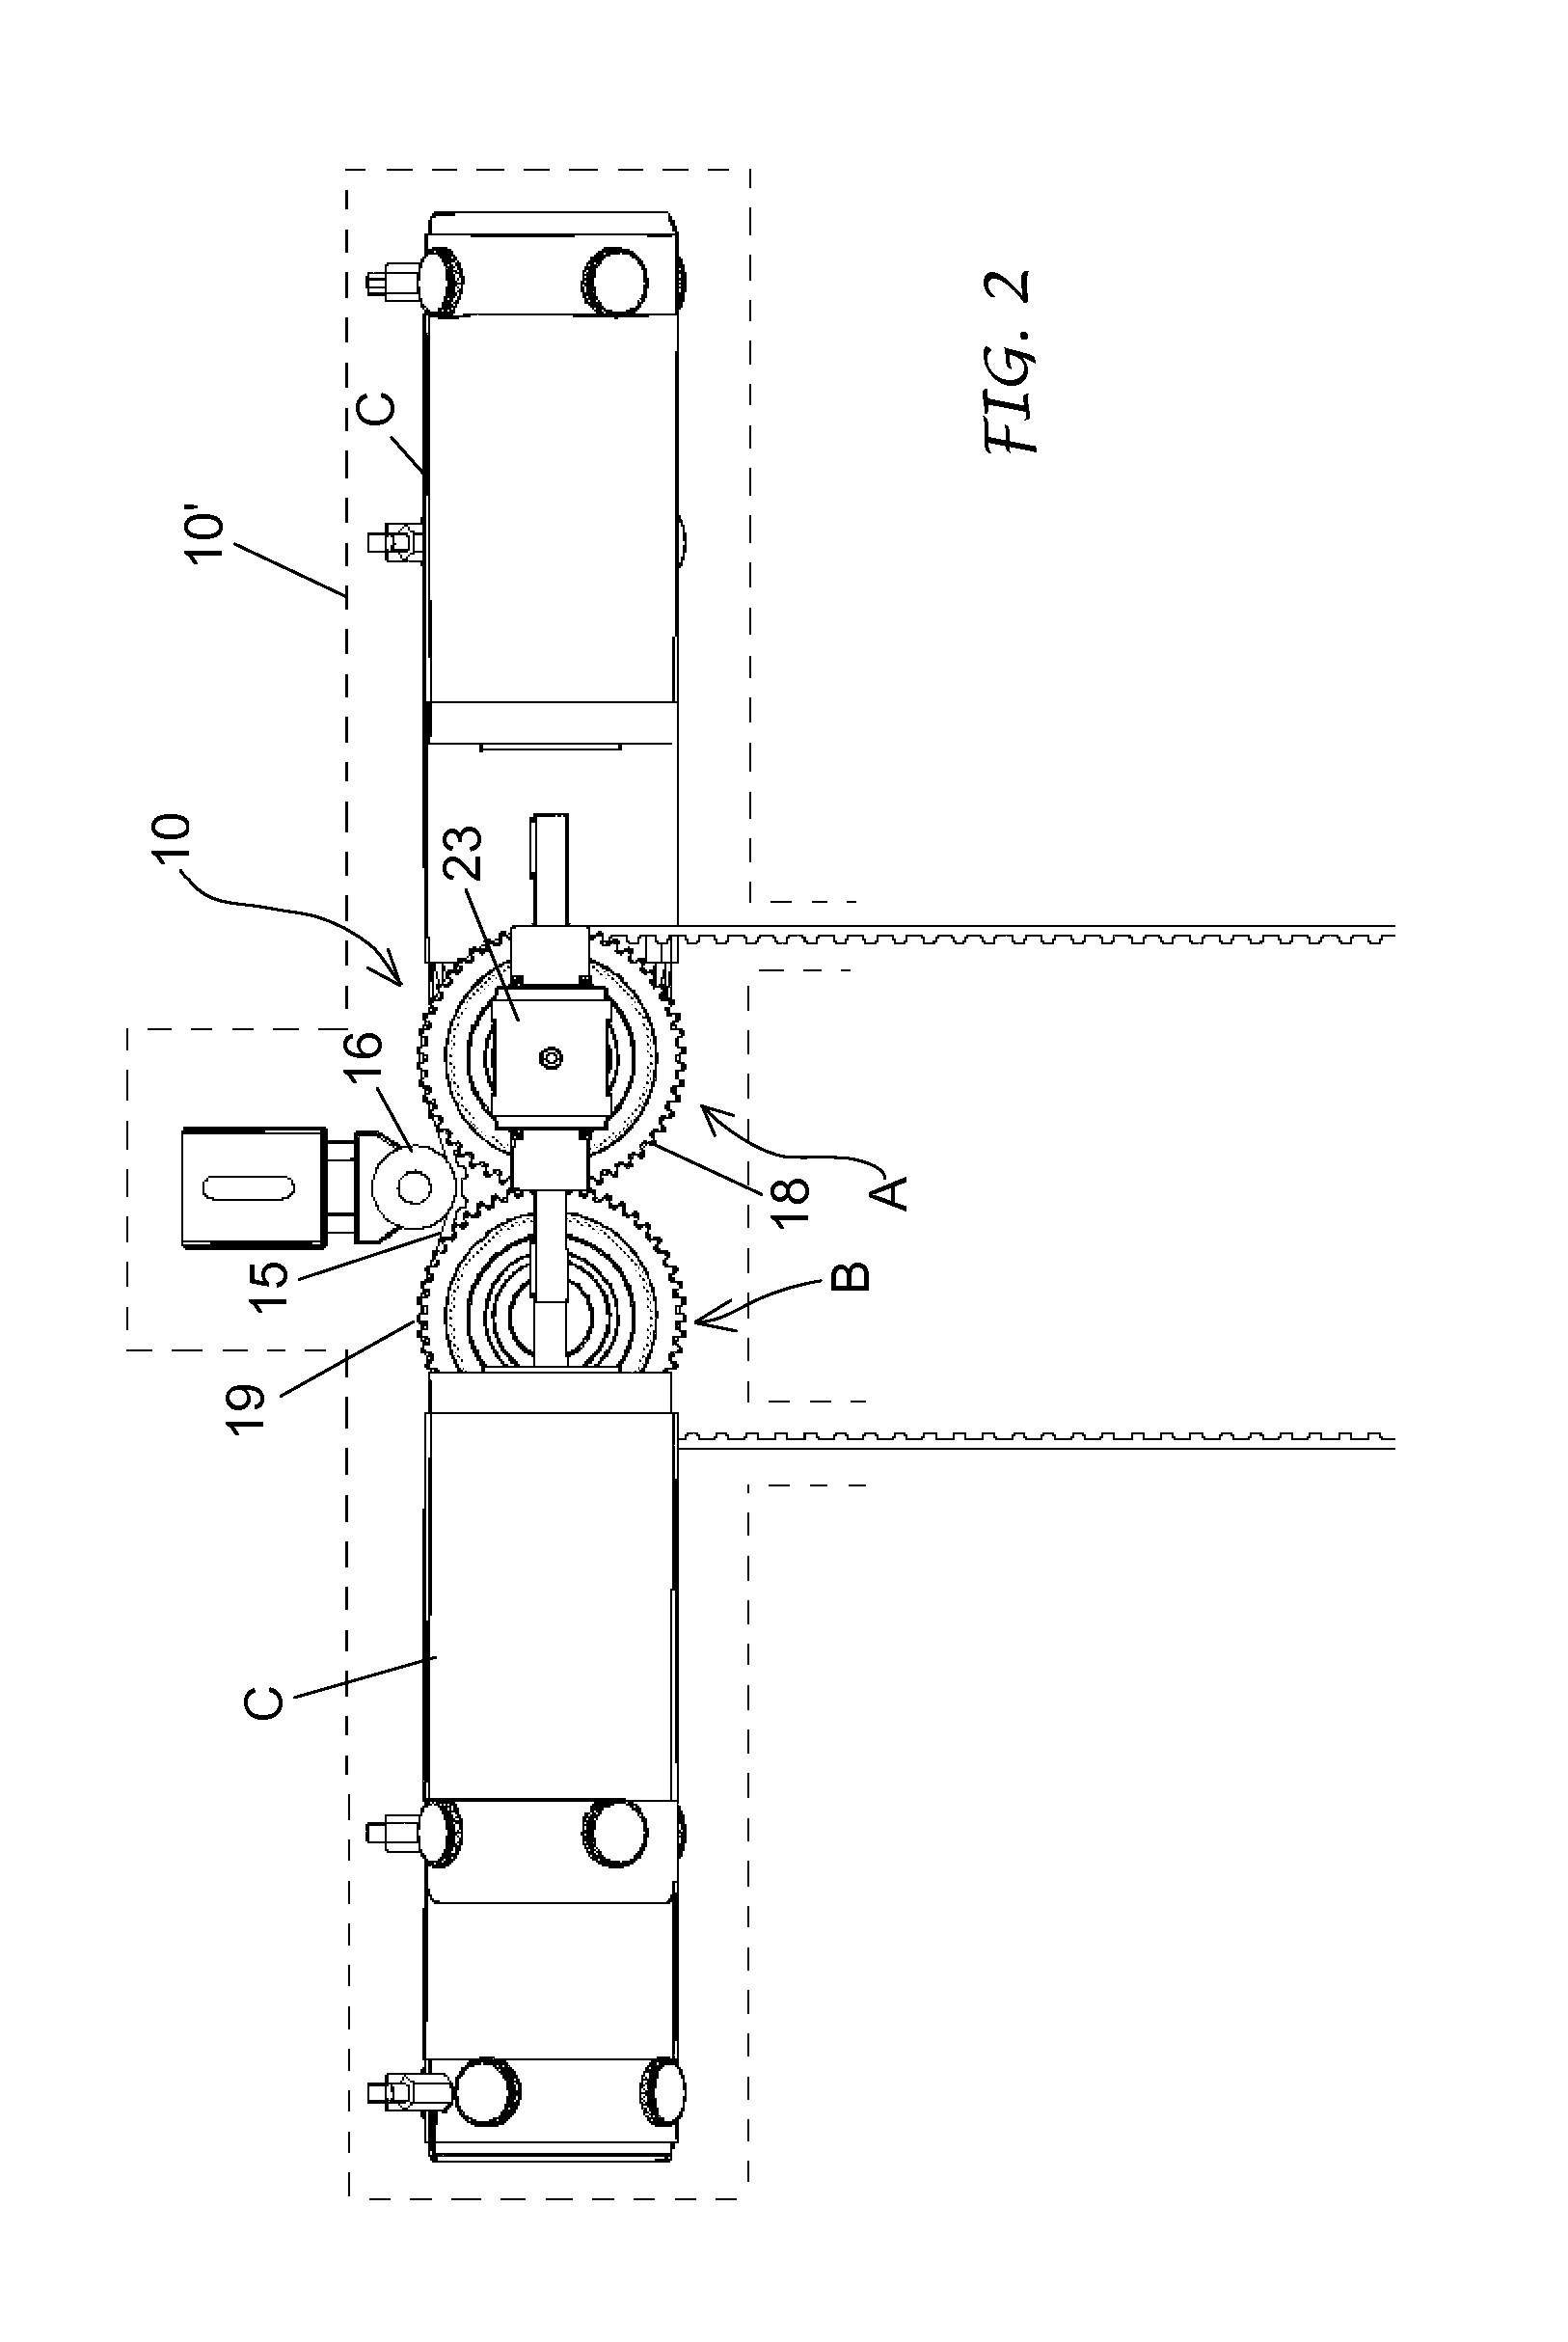 Apparatus for producing electric or mechanical energy from wave motion